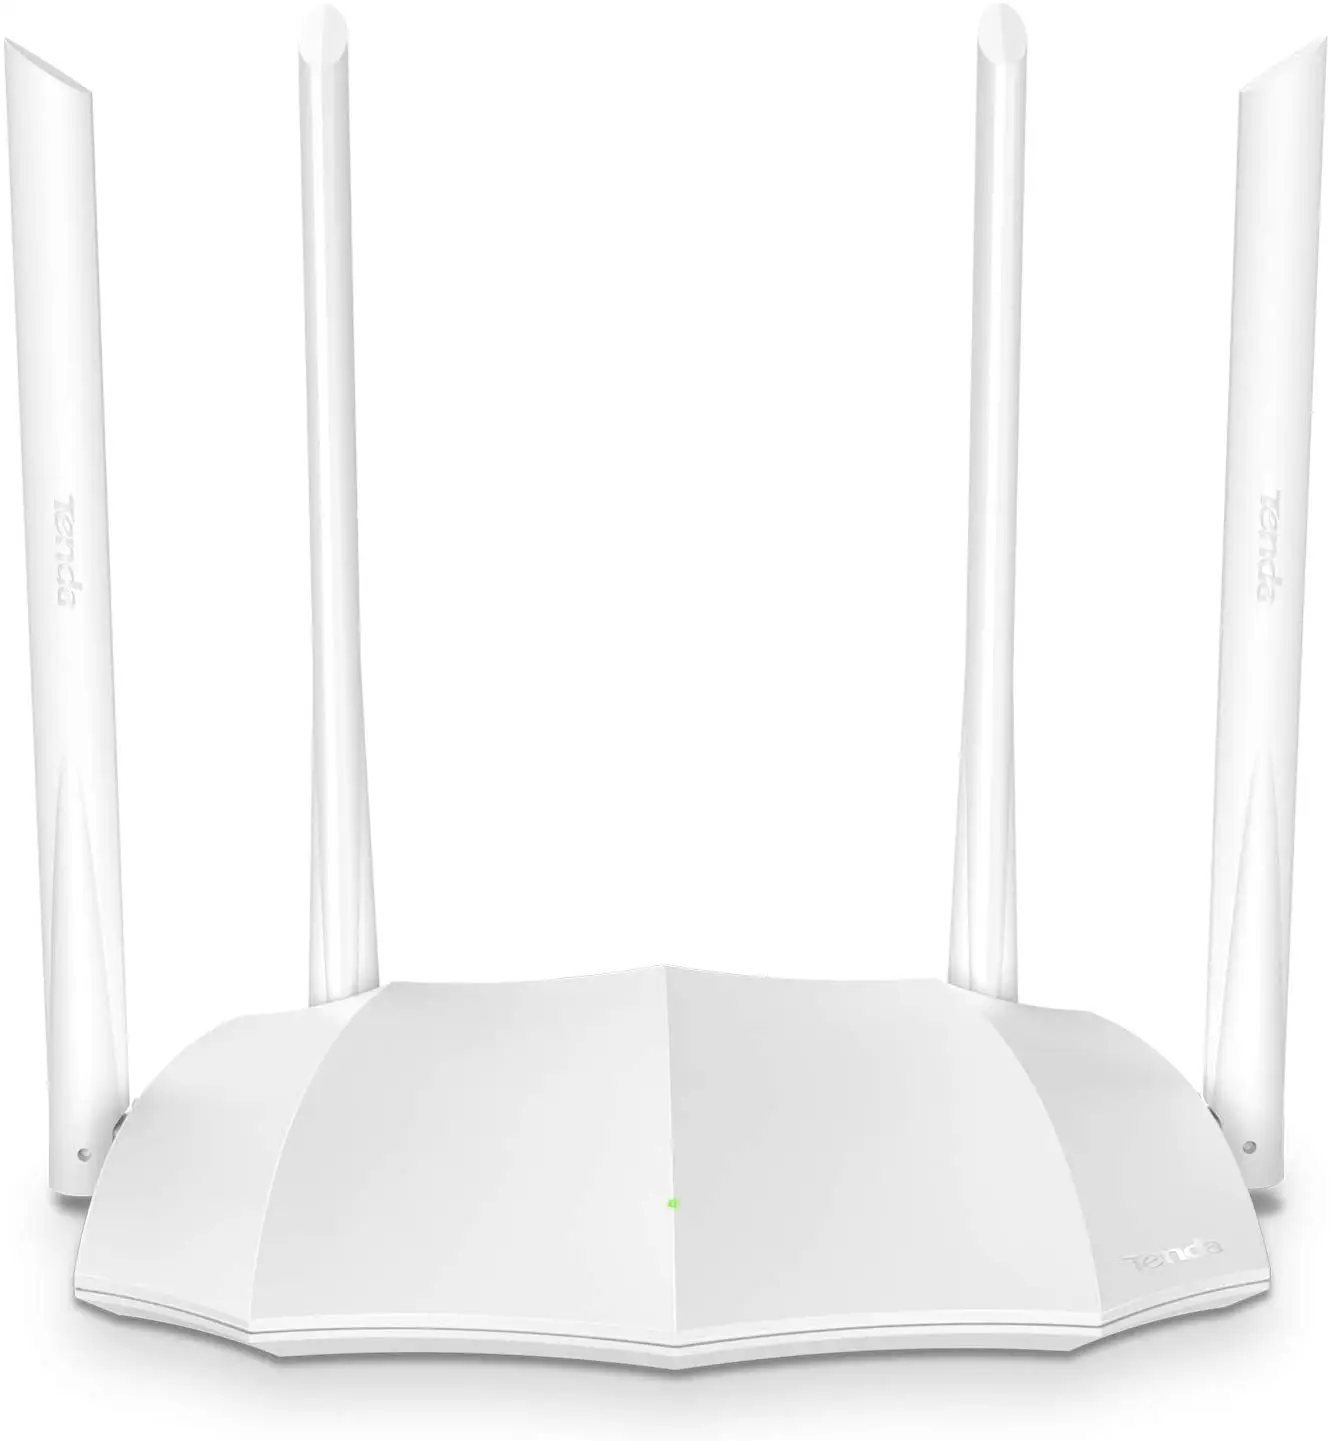 Tenda AC5s AC1200 Dual Band WiFi Router Wireless 1200Mbps Home Router Home Office Use Internet Router